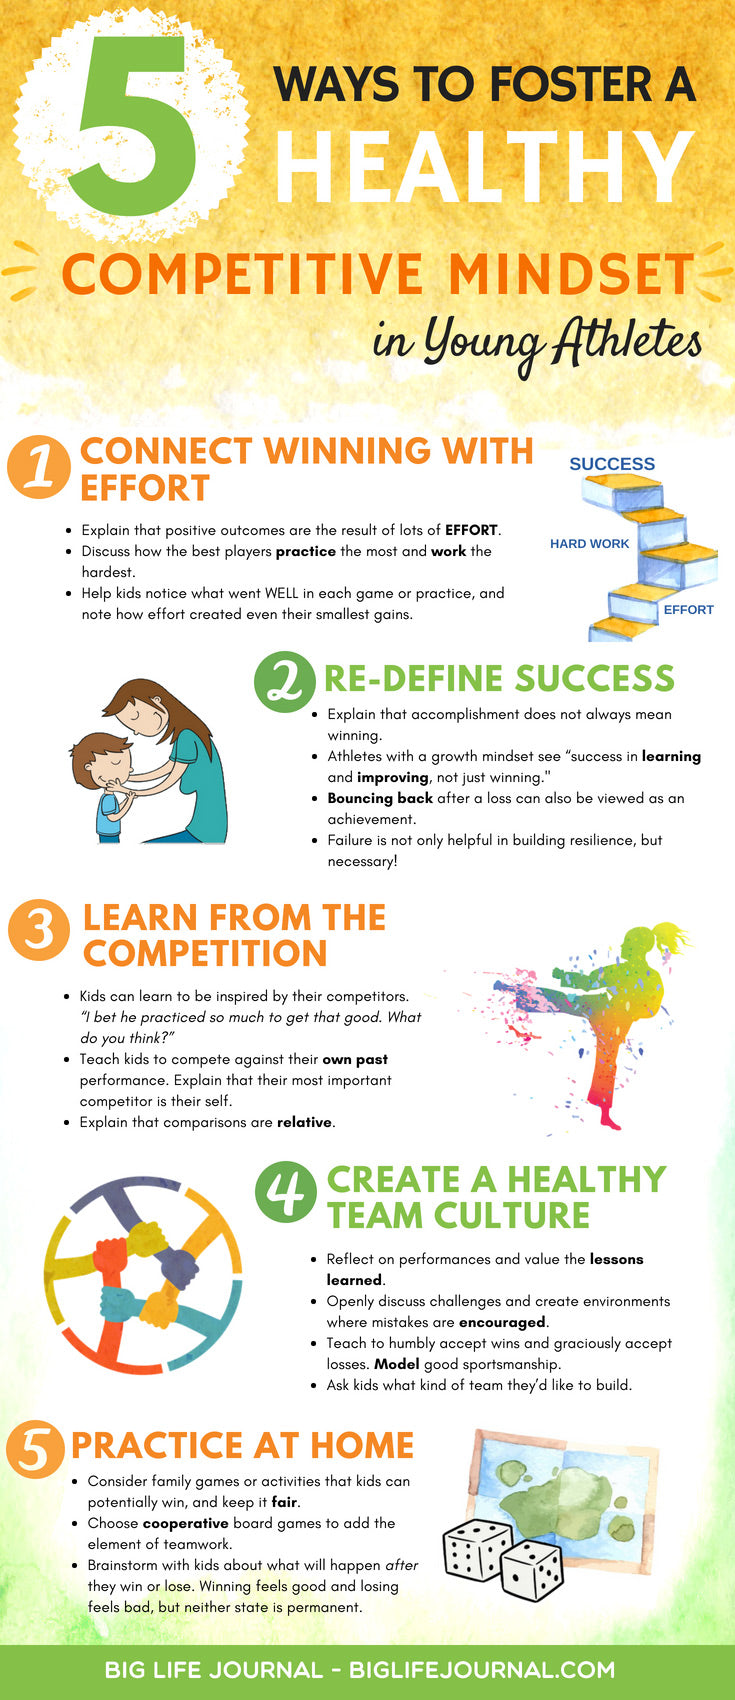 Building a growth mindset in young athletes